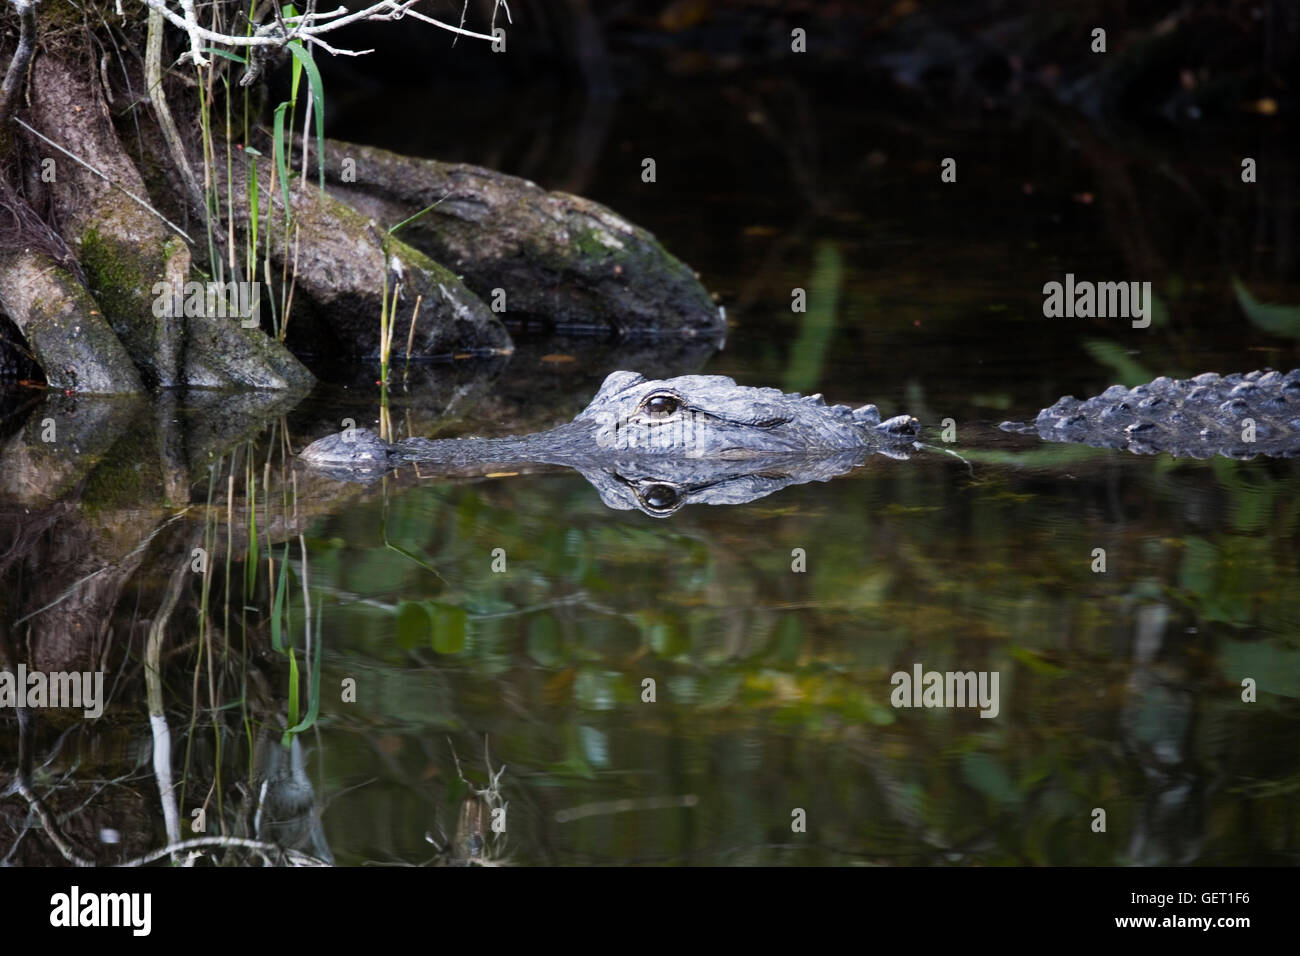 Gator seems to blend perfectly into its environment , its texture morphing into the texture of the cypress. Stock Photo